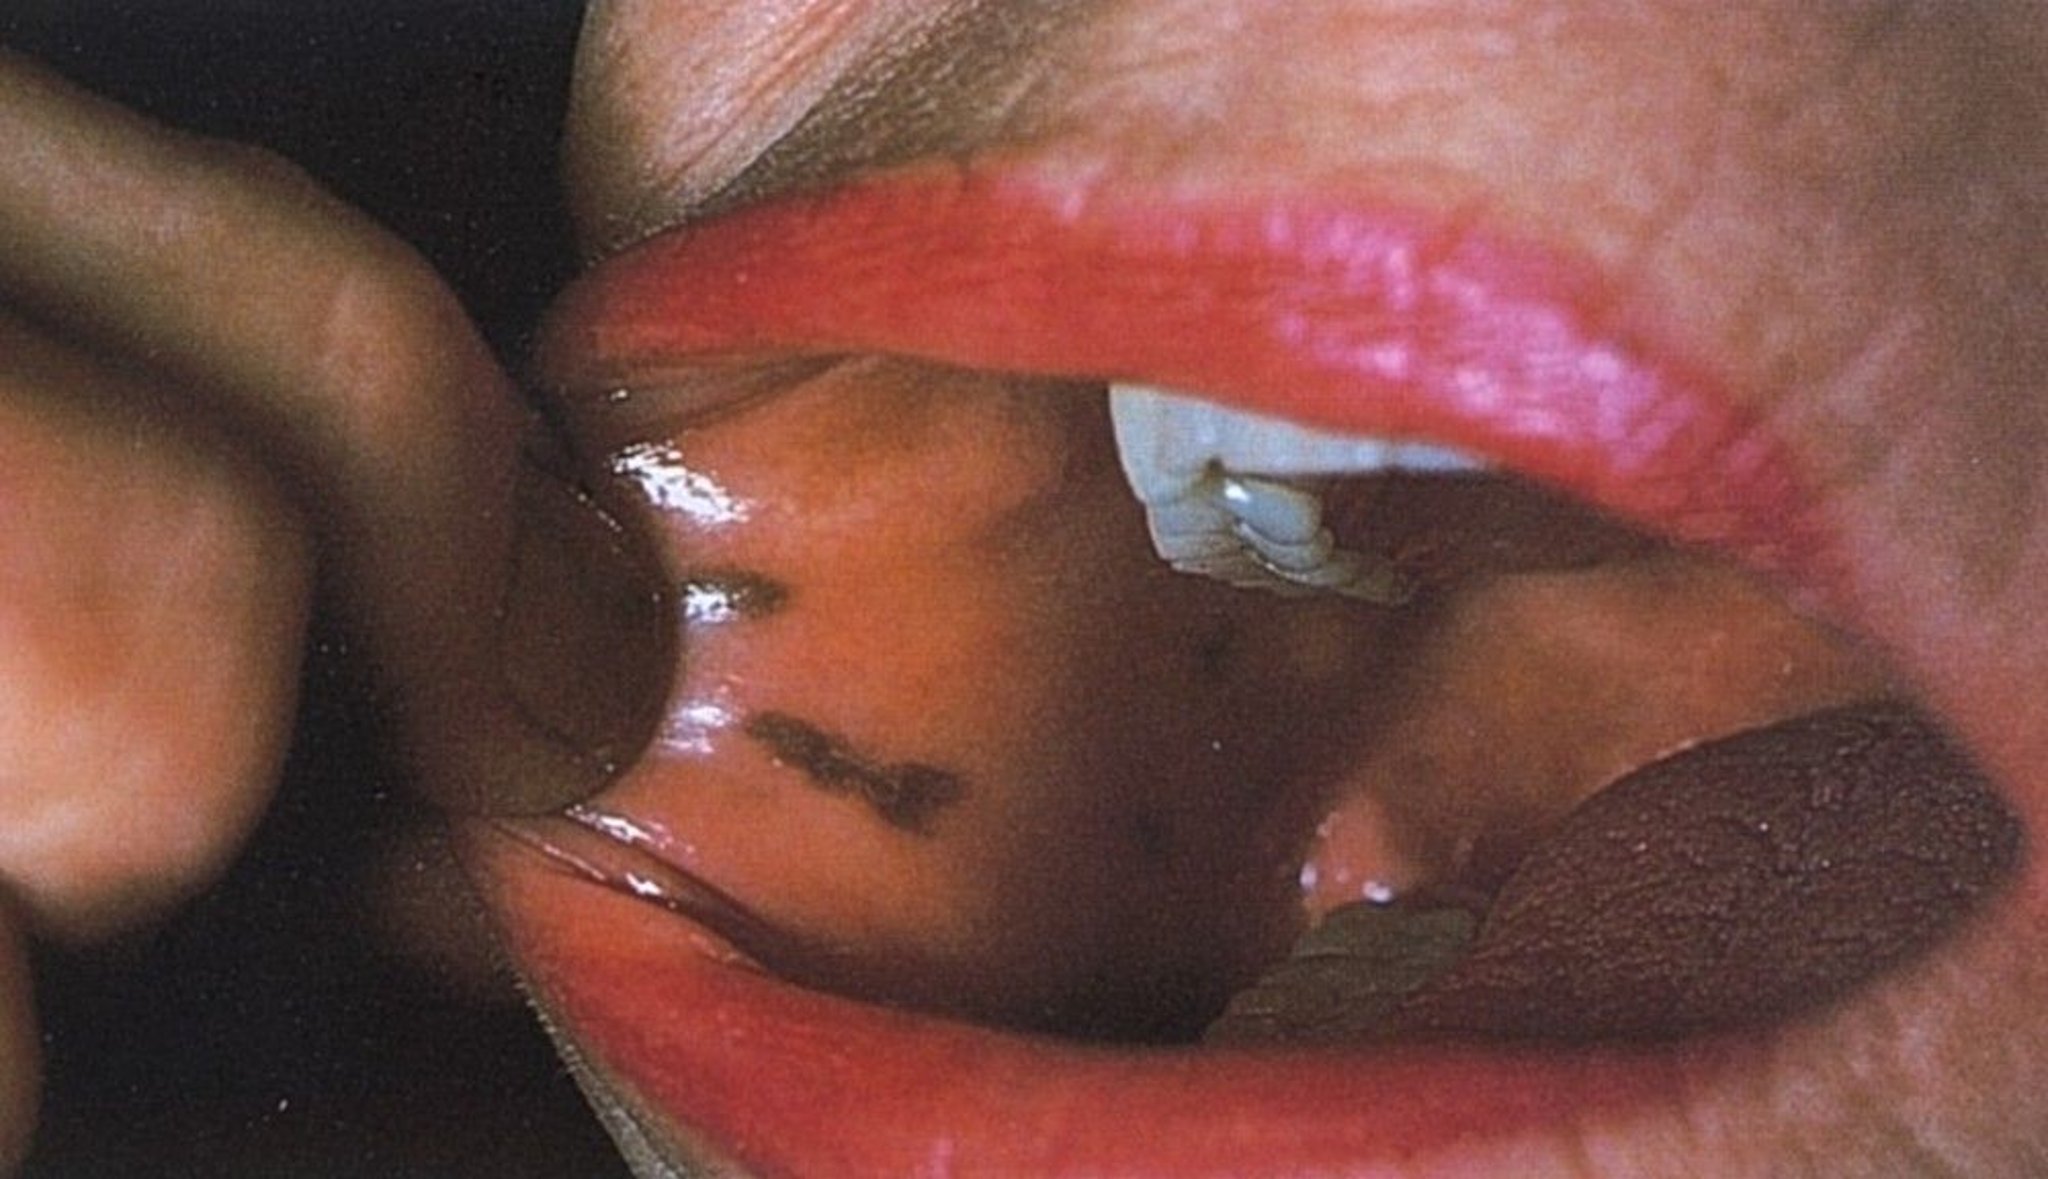 Bluish Black Spots Inside the Mouth (Peutz-Jeghers Syndrome)